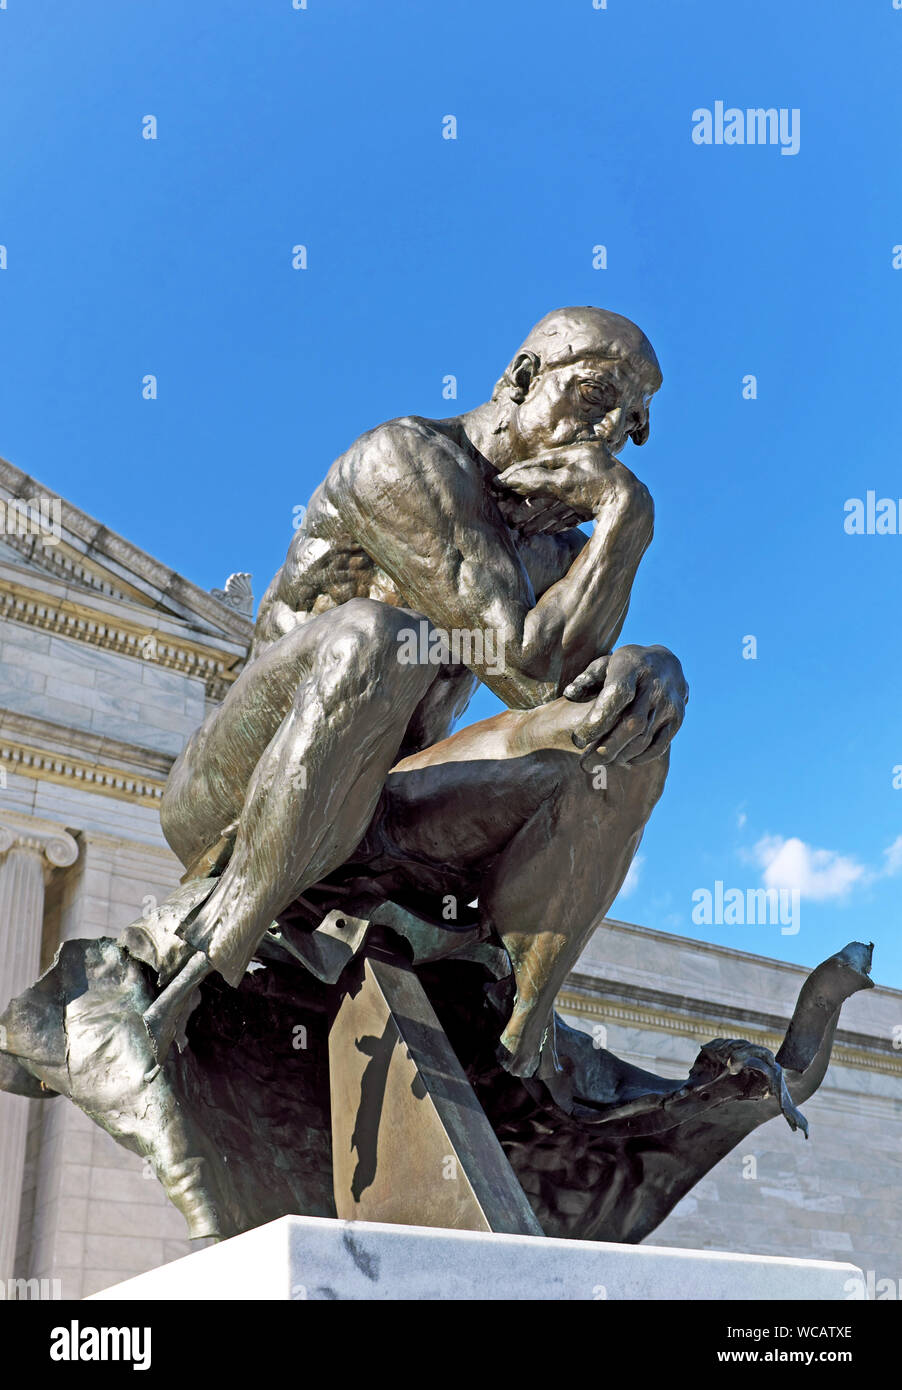 A Rodin-supervised cast of The Thinker, damaged in 1970 by a bomb, sits in front of the south entrance of the Cleveland Museum of Art in Cleveland, OH. Stock Photo